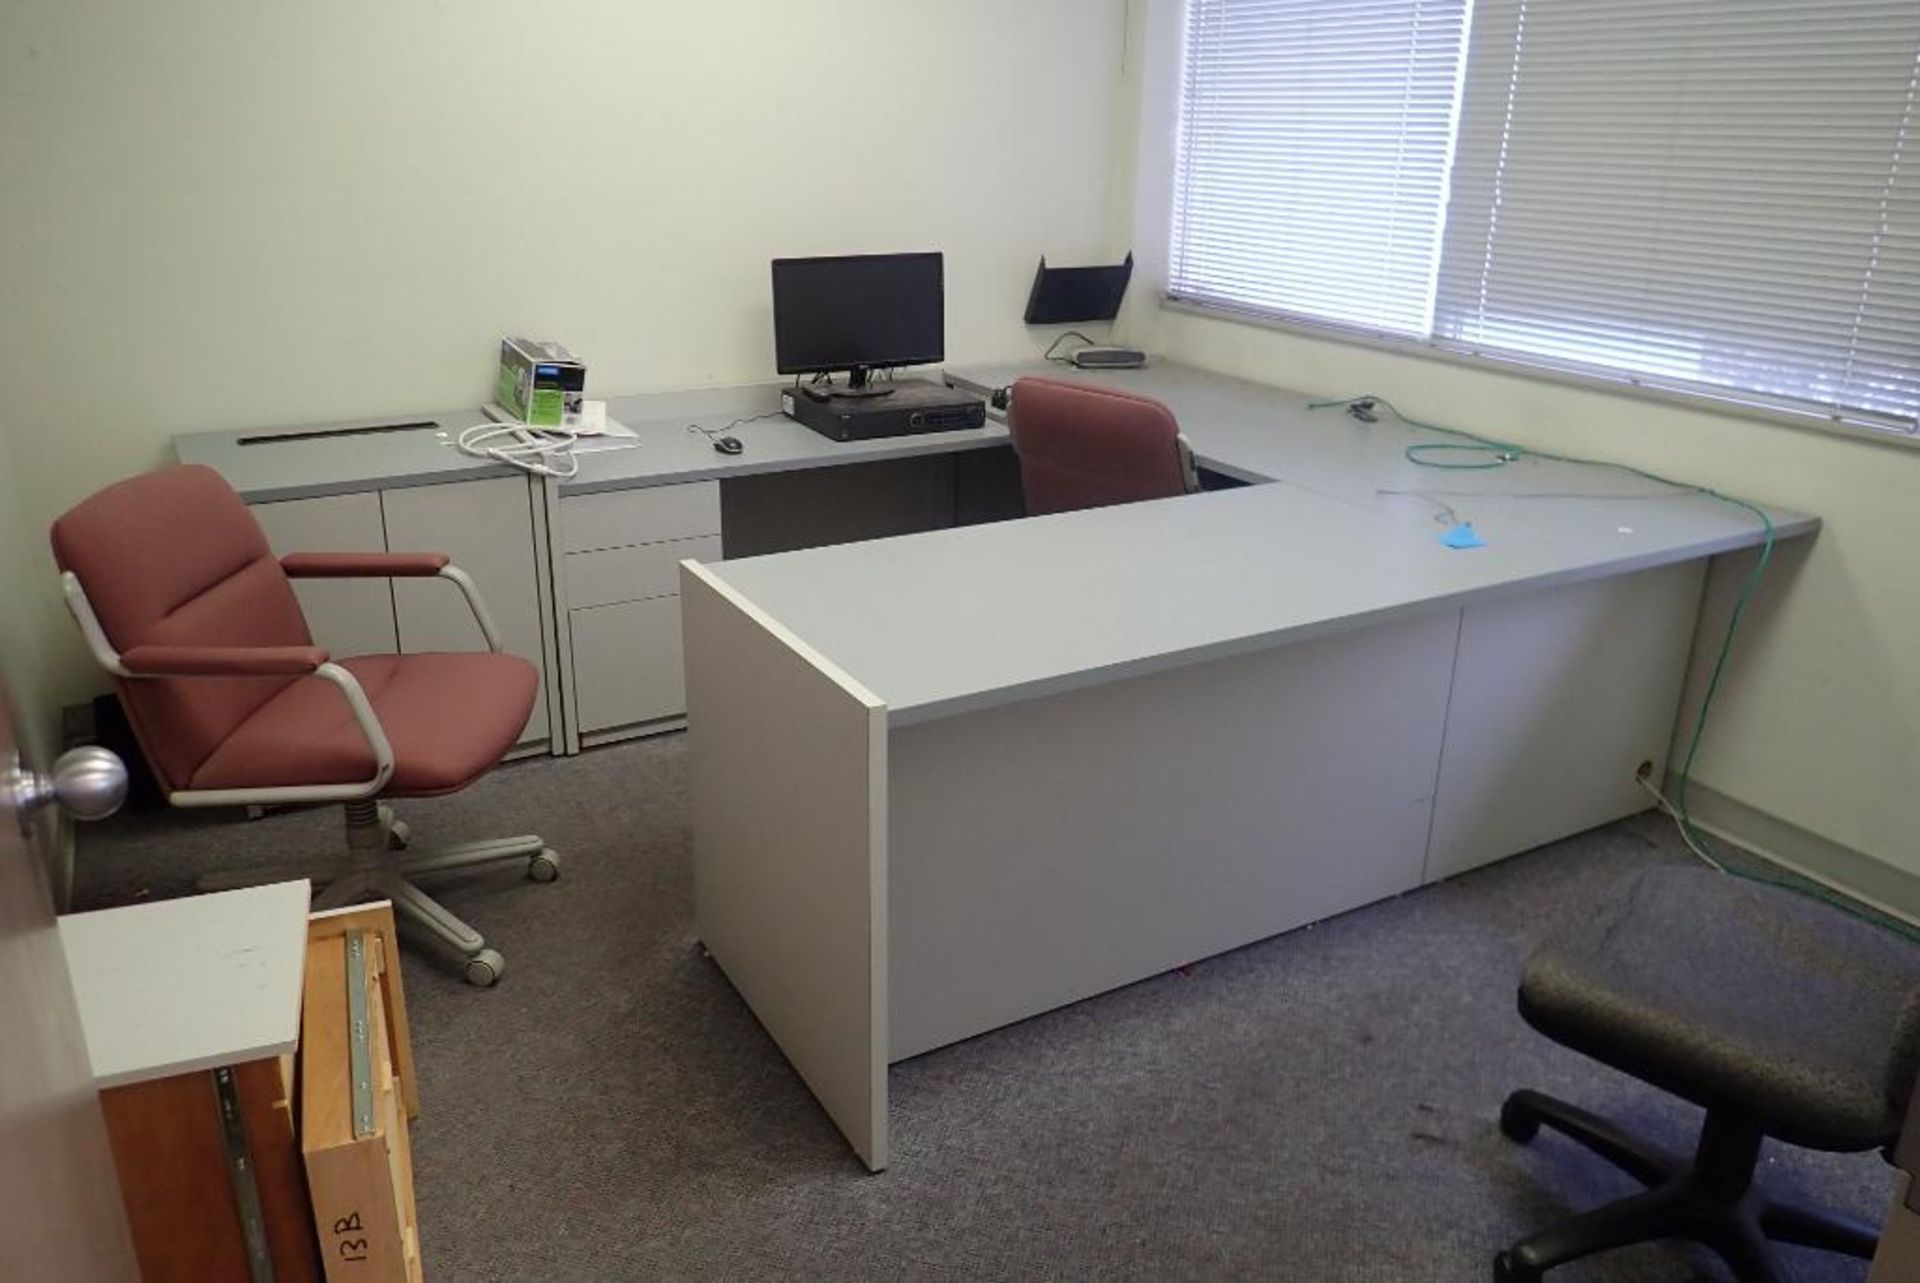 Lot of U-Shaped Desk, (2) Task Chairs, Steno Chair, NVR Security System- NO CAMERAS.